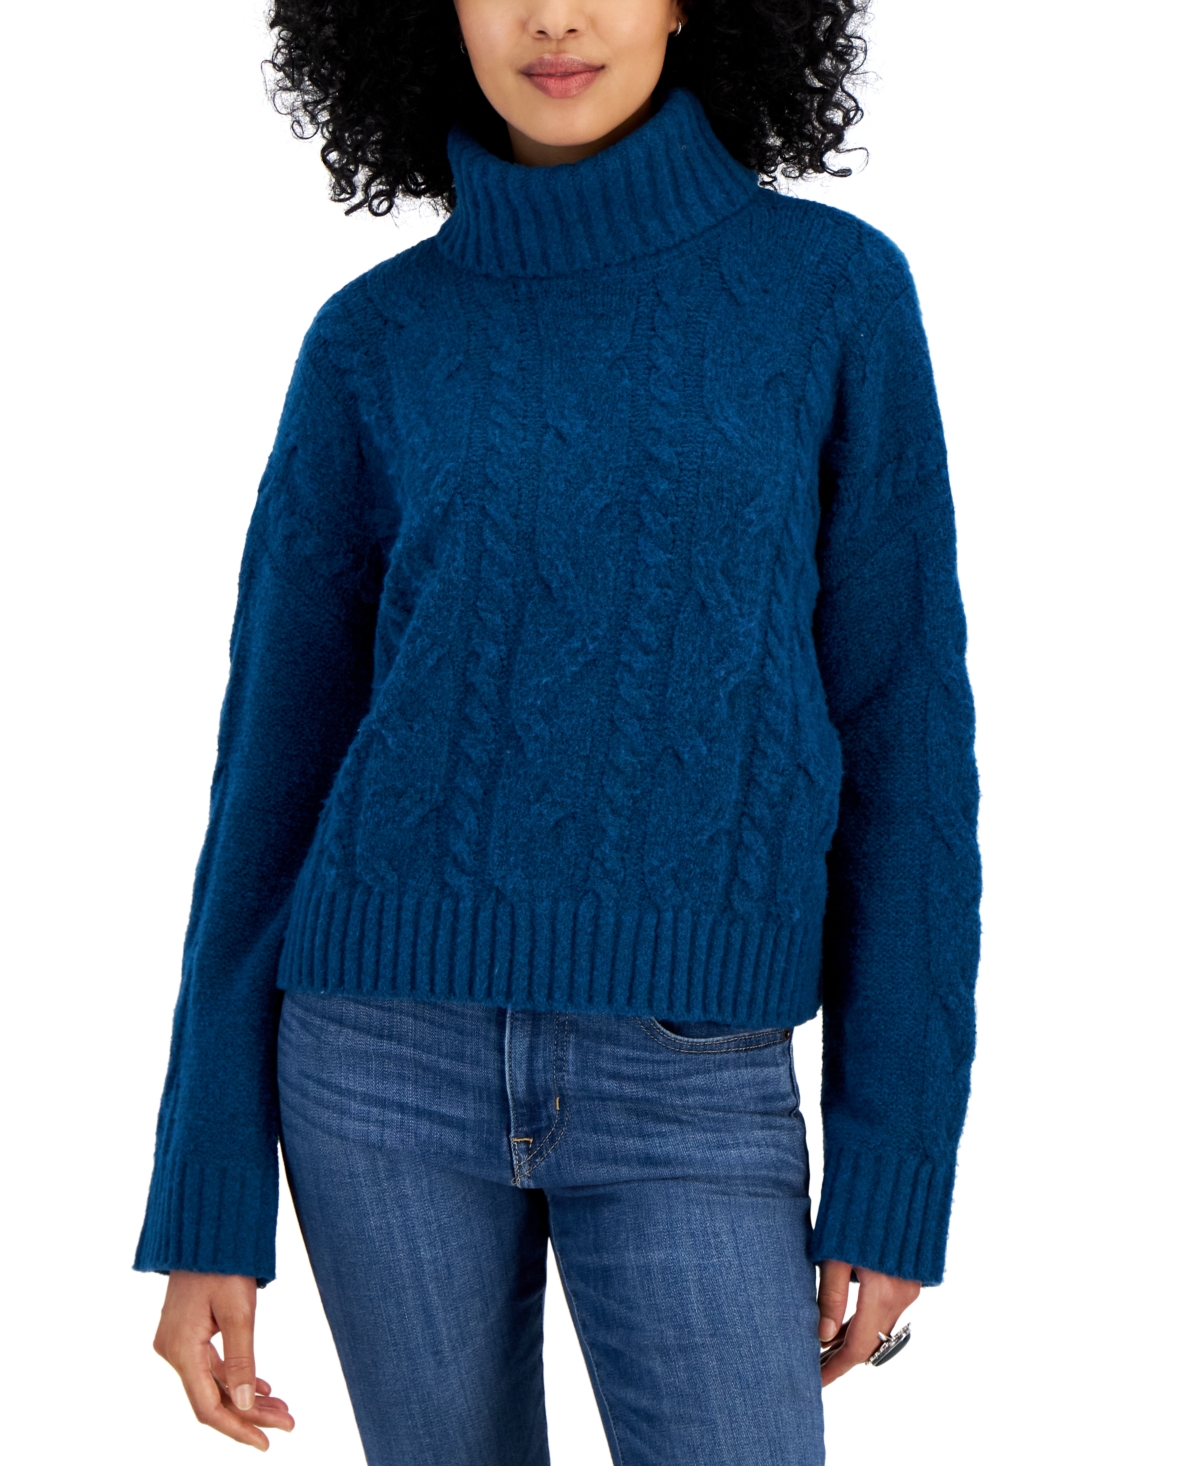 Juniors' Cable-Knit Turtleneck Sweater - Poppy Pine